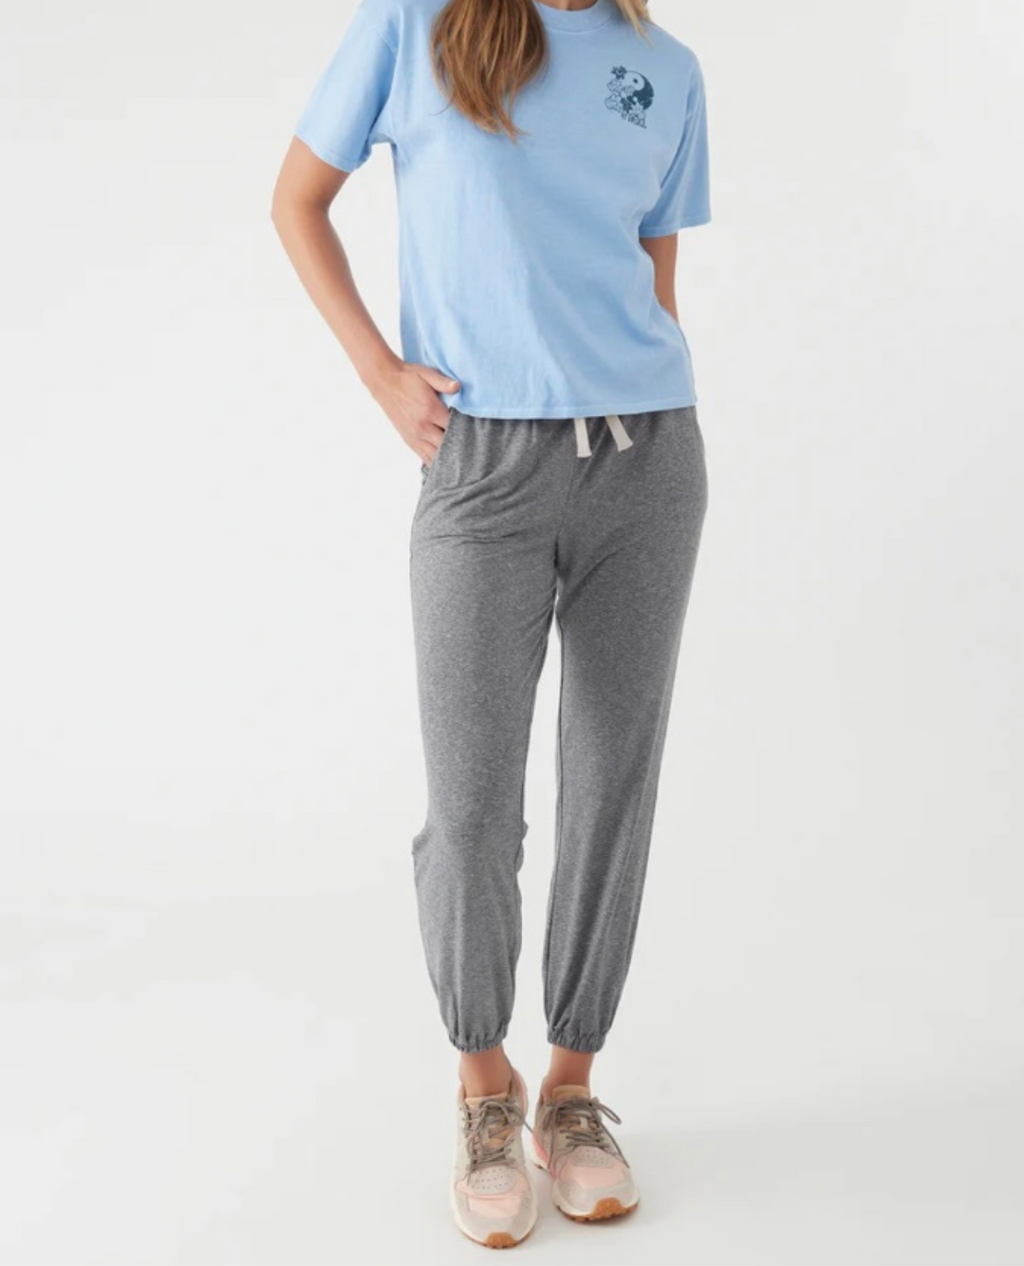 Damso Lounge Jogger Pants - Island Outfitters